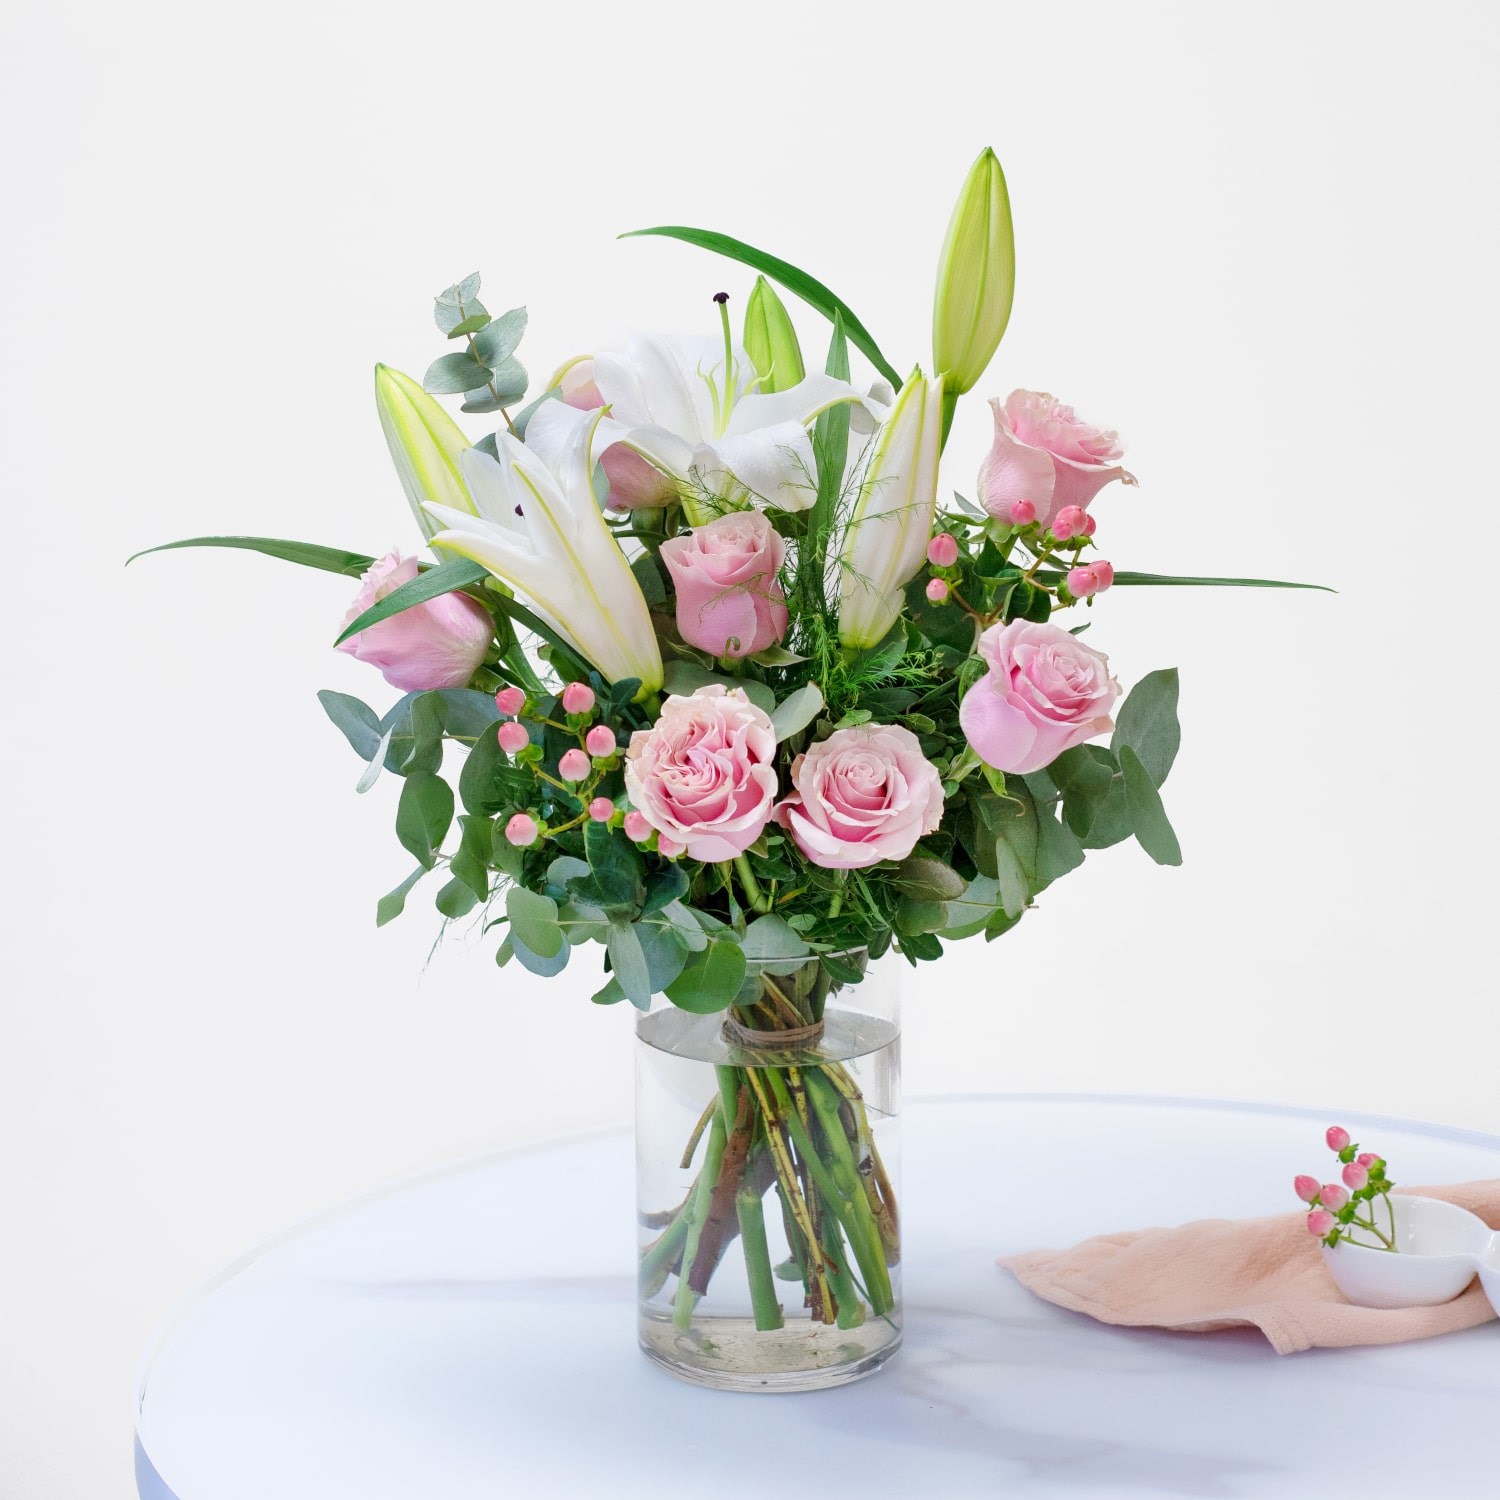 Arrangement of Roses and Lilies